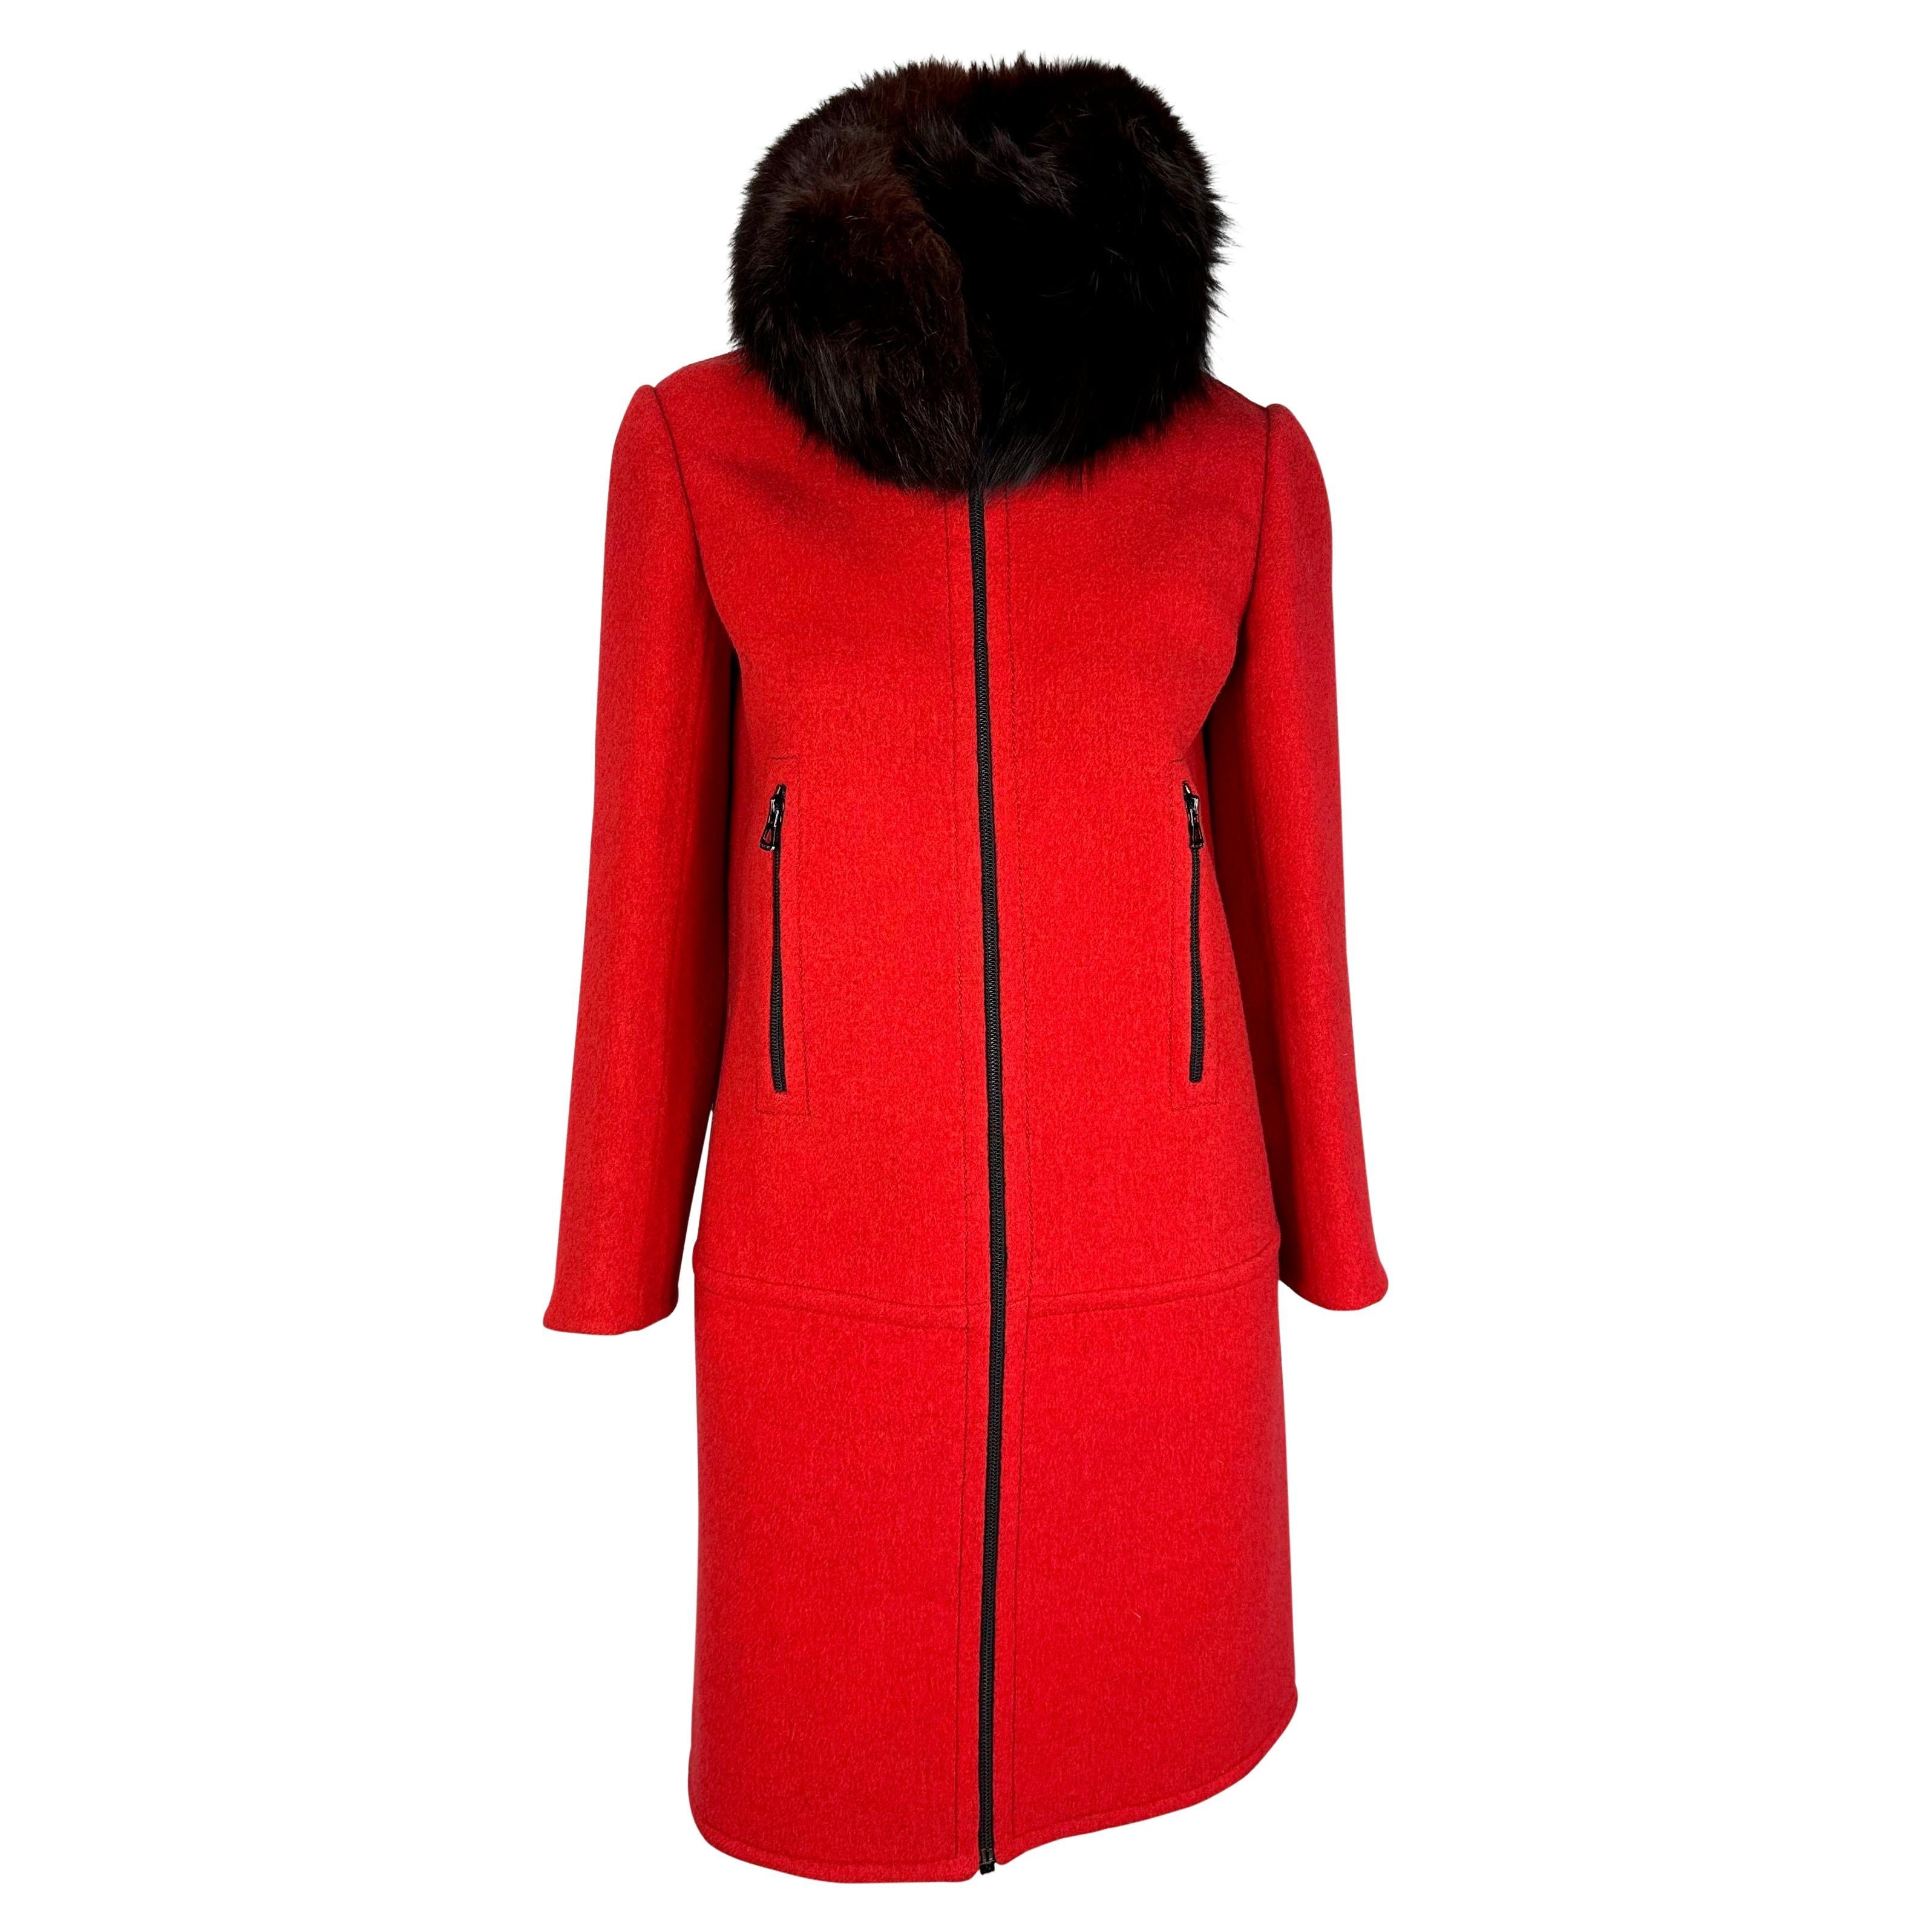 F/W 1969 Christian Dior Haute Couture Red Wool Fur Collar Jacket  For Sale